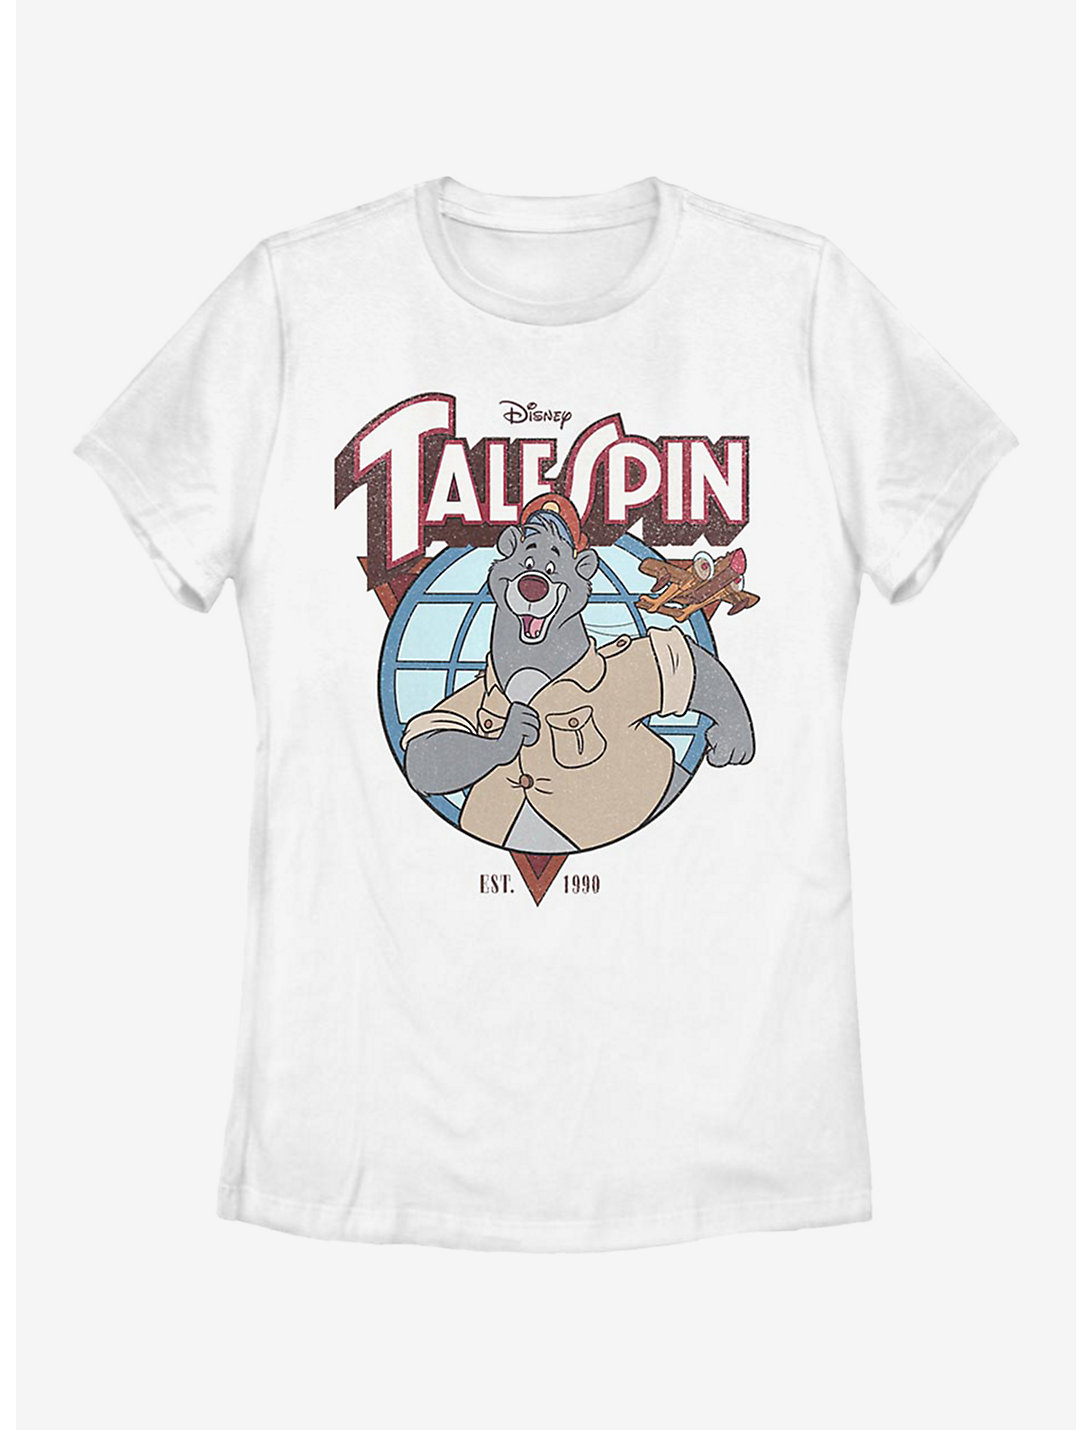 tale spin shirt